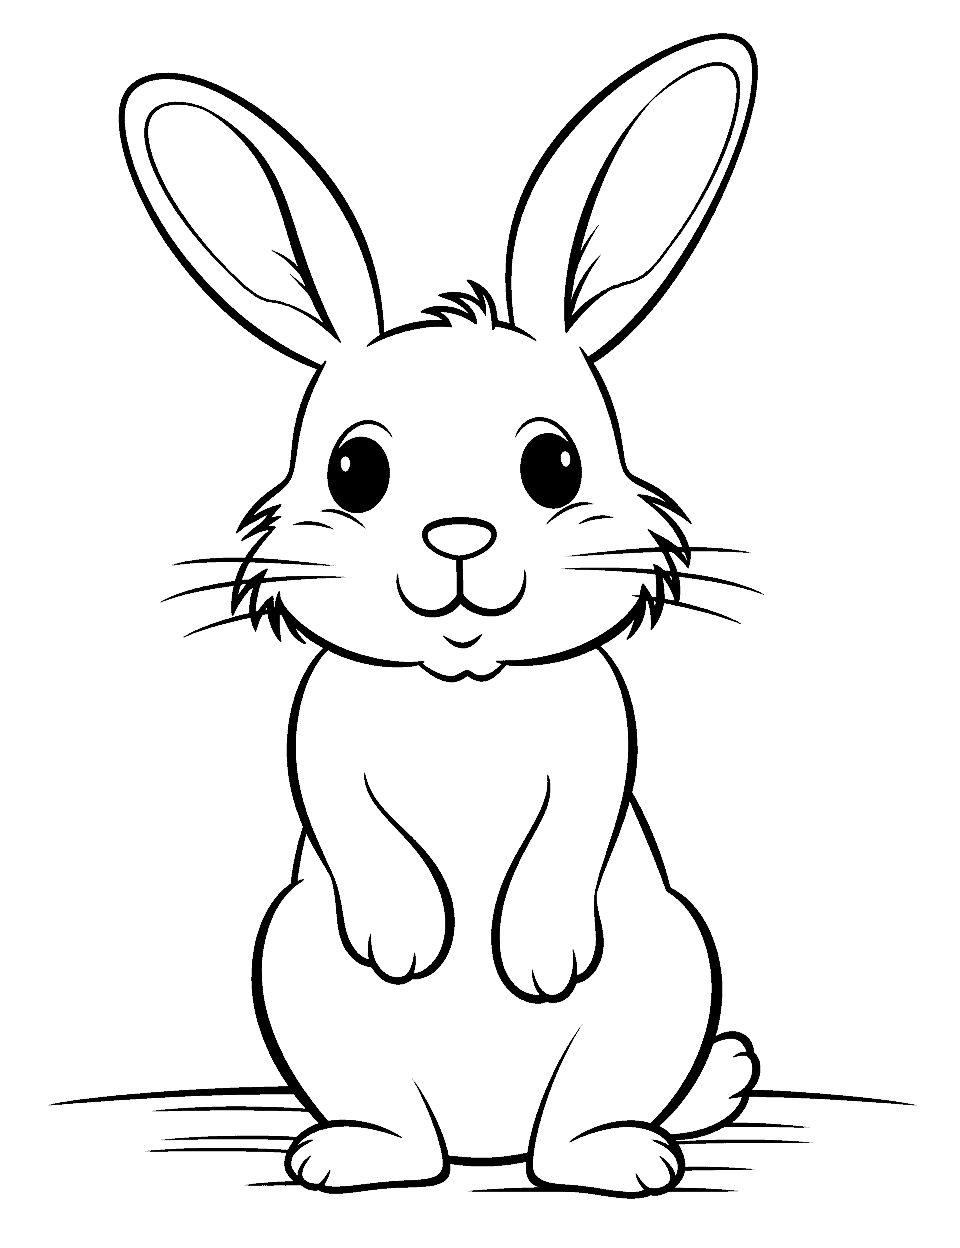 Easy Bunny Animal Coloring Page - An easy and simple bunny with floppy ears and a fluffy tail.